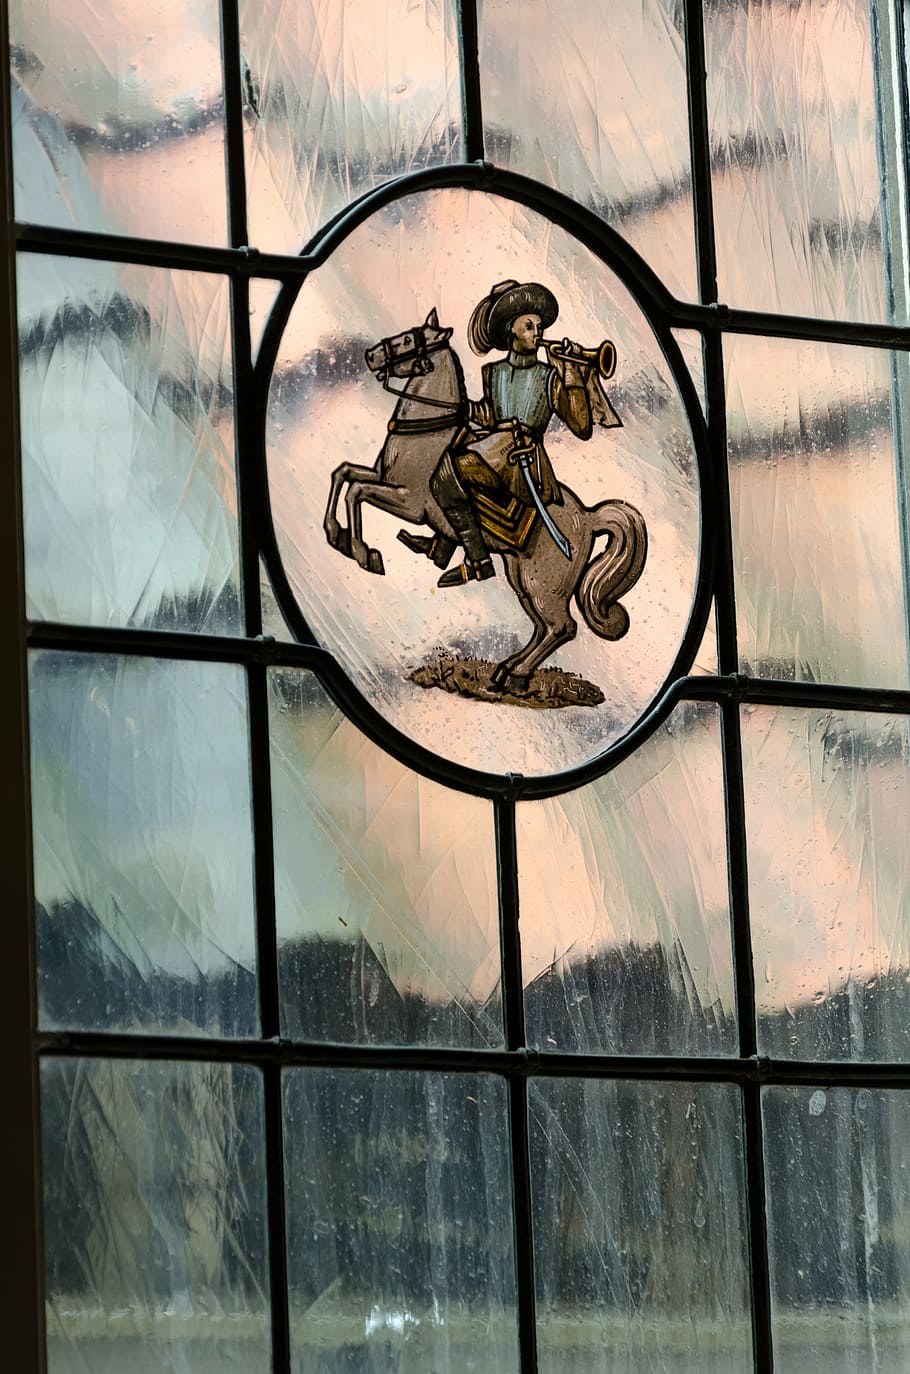 stained glass, window, rider, horse, hannemahuis is situated, museum, harlingen, glass - material, transparent, reflection